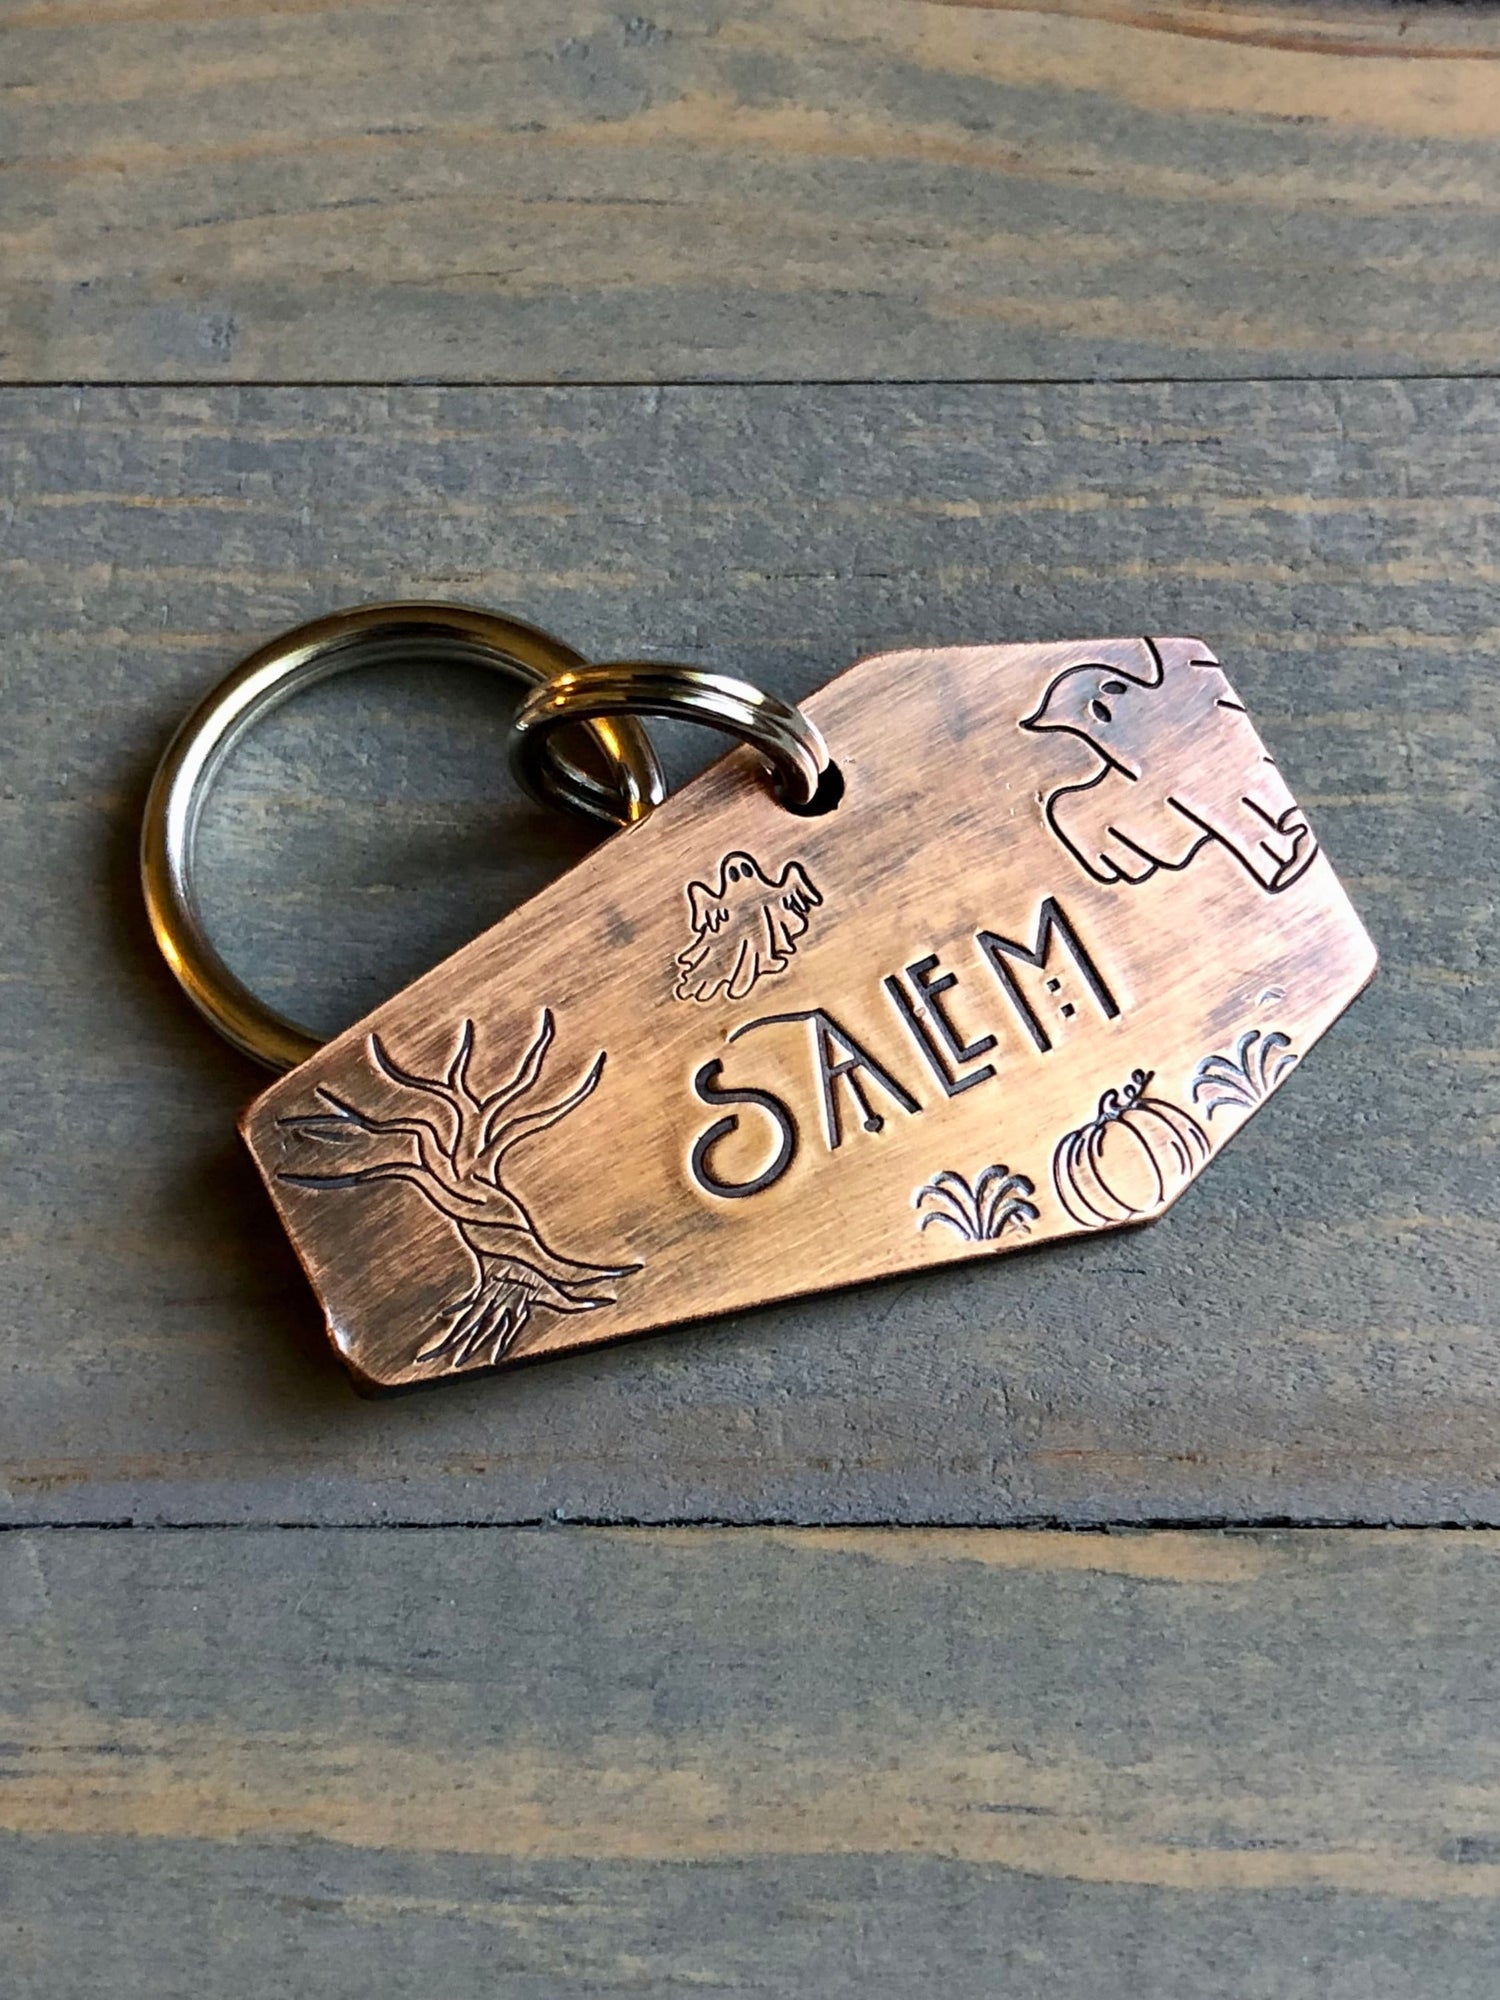 Custom Coffin Dog Tag, Hand Stamped Pet ID, Personalized Dog Tag for Dog, Halloween Collar Tag, Tag with Ghosts, Spooky Dog Tag, Salem